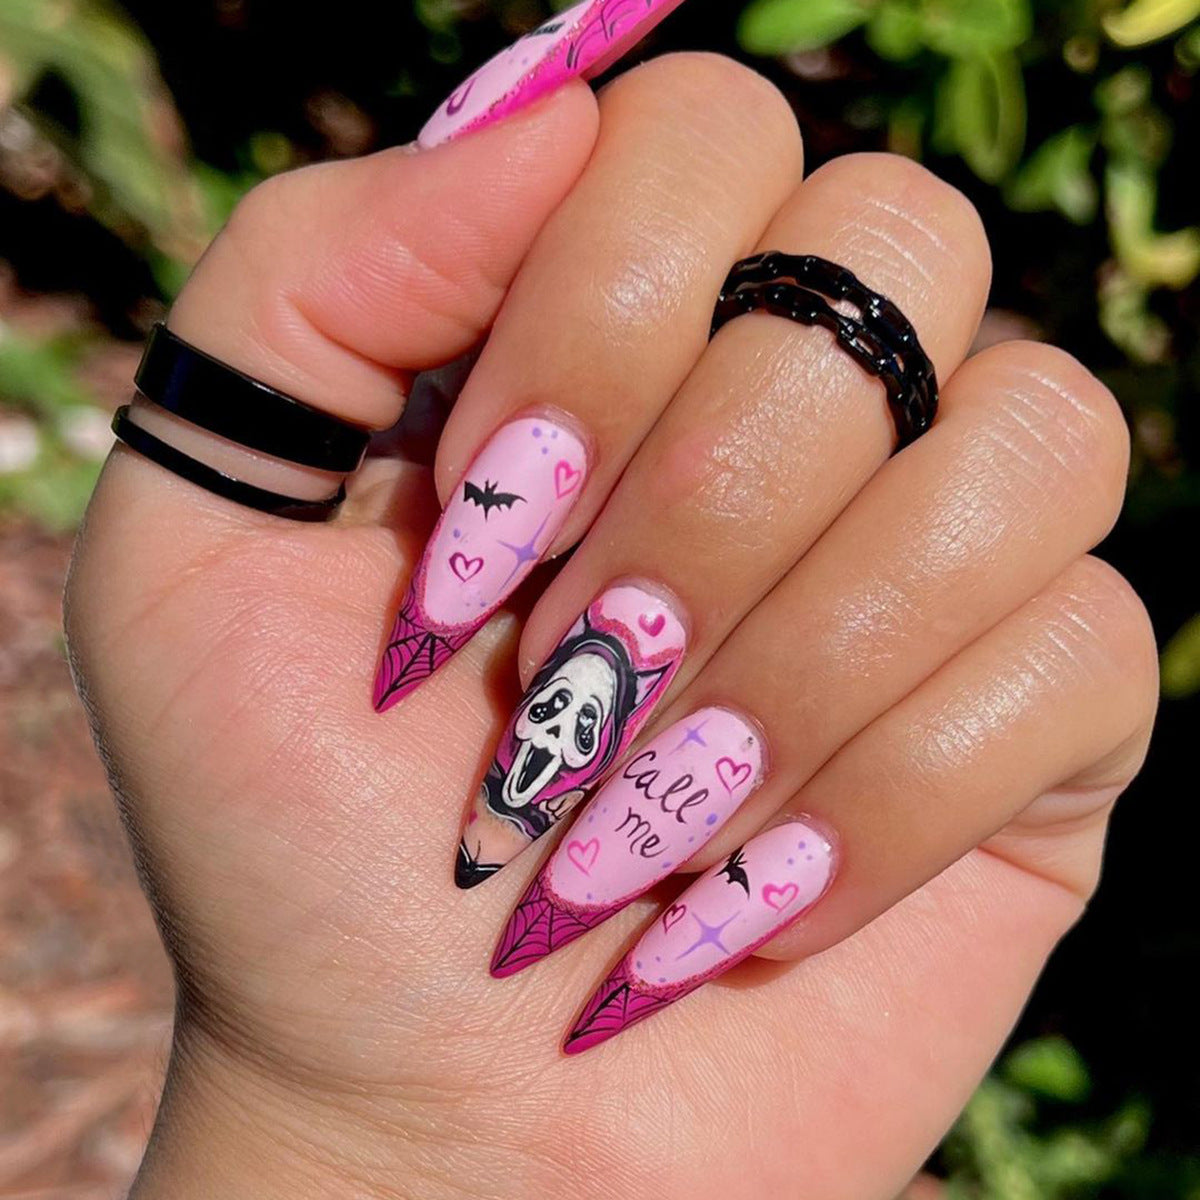 Who Are You Long Coffin Pink Halloween Press On Nails – RainyRoses